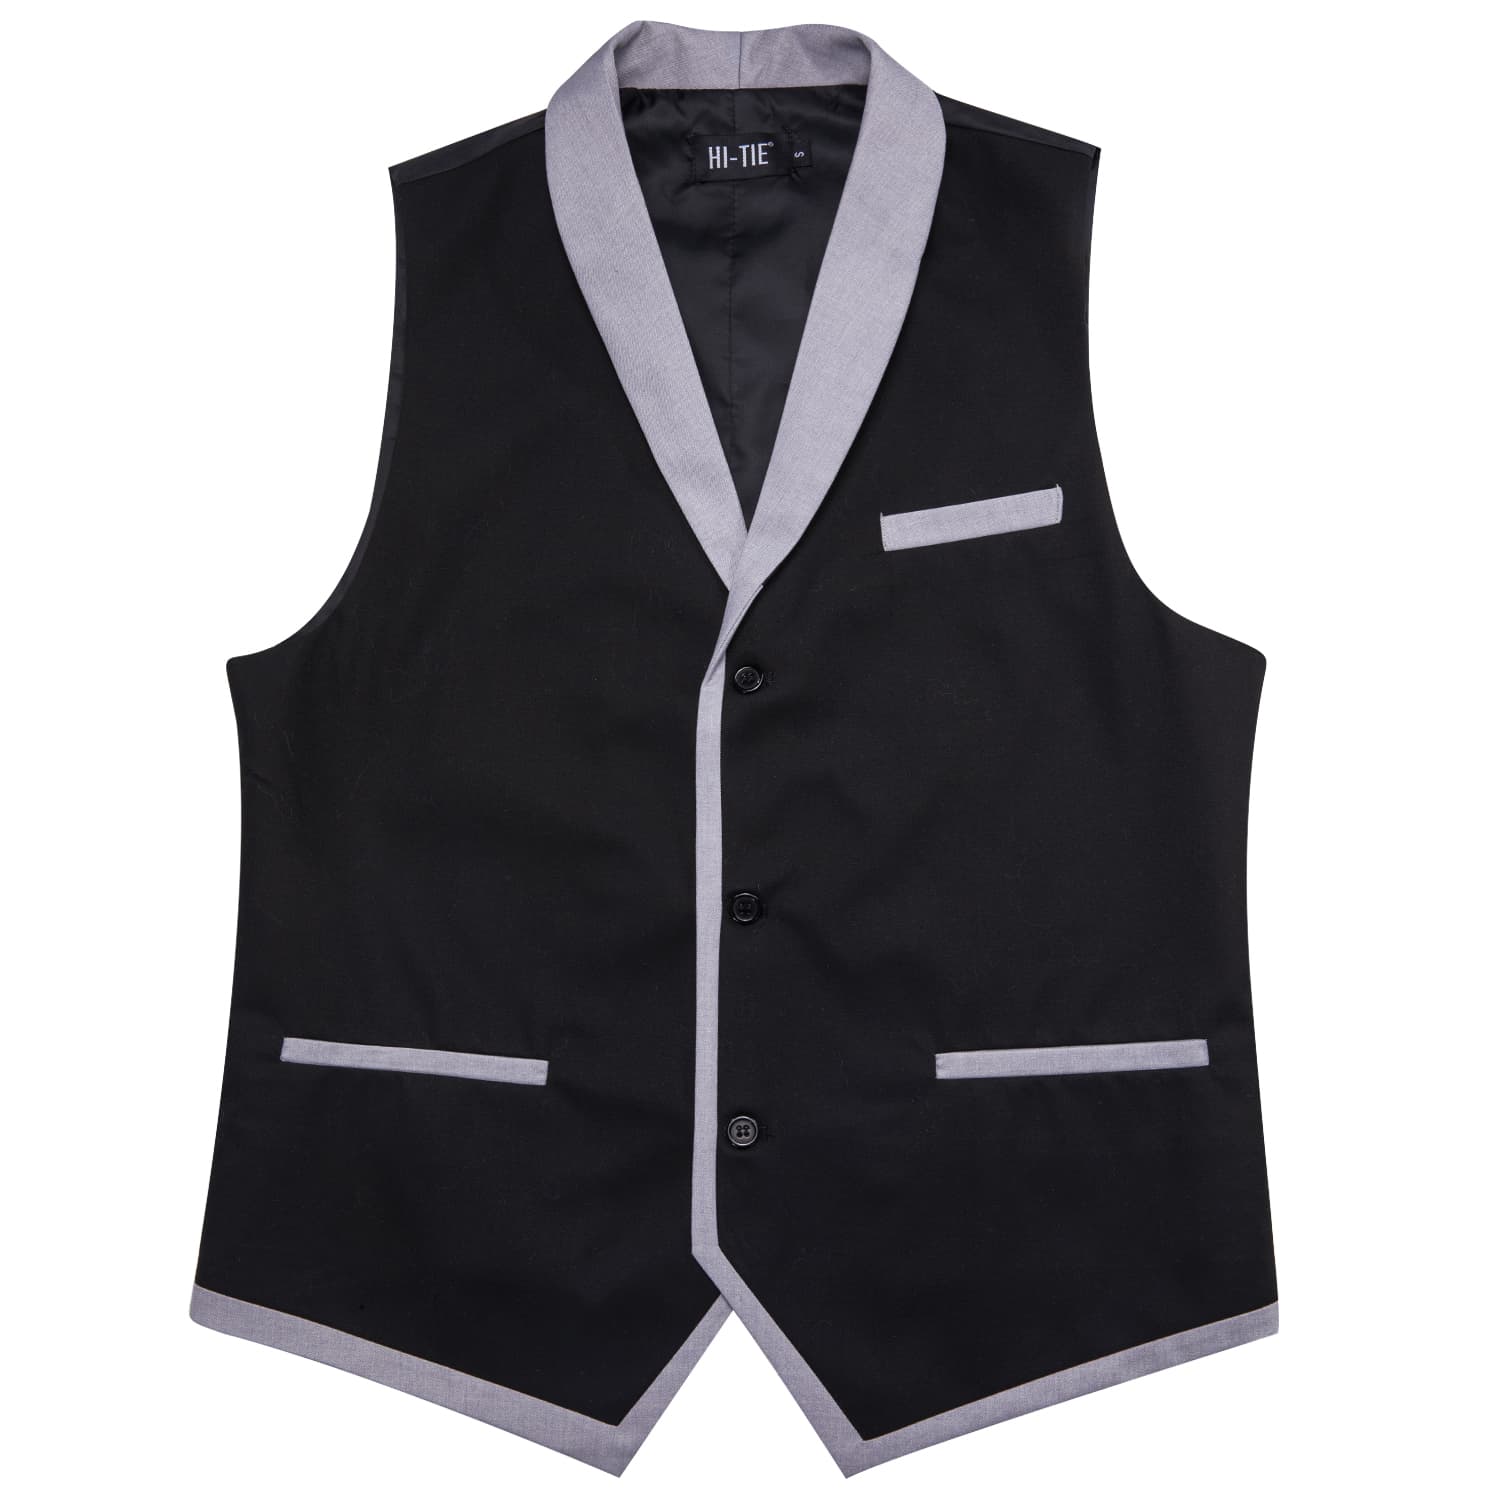  Grey Shawl Collar Black Solid Waistcoat Formal Vests for Business